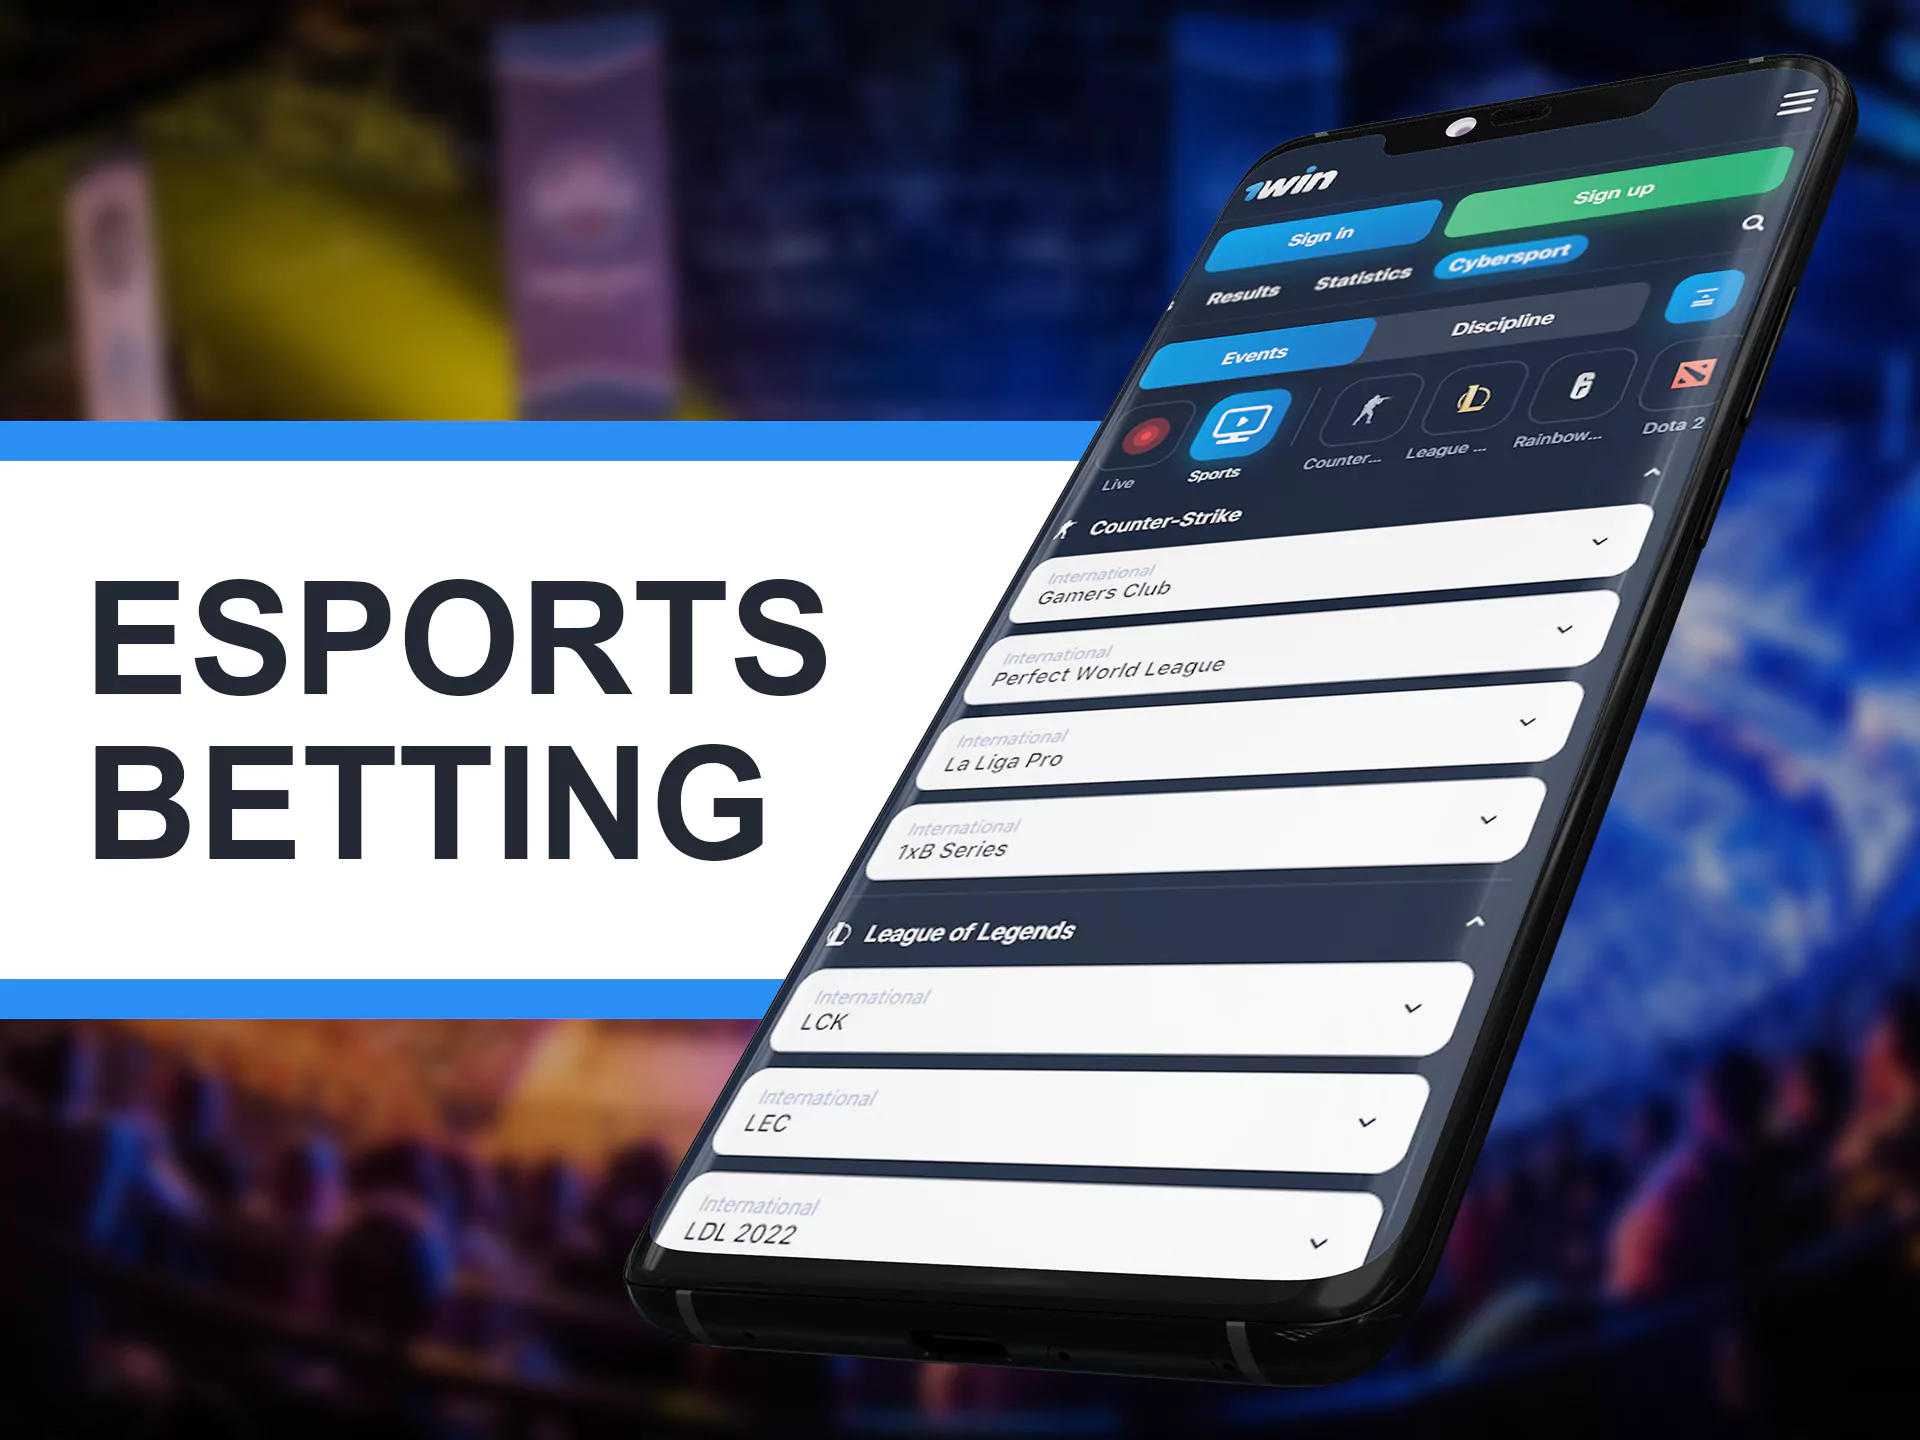 Bet on esports and watch matches online at 1win.